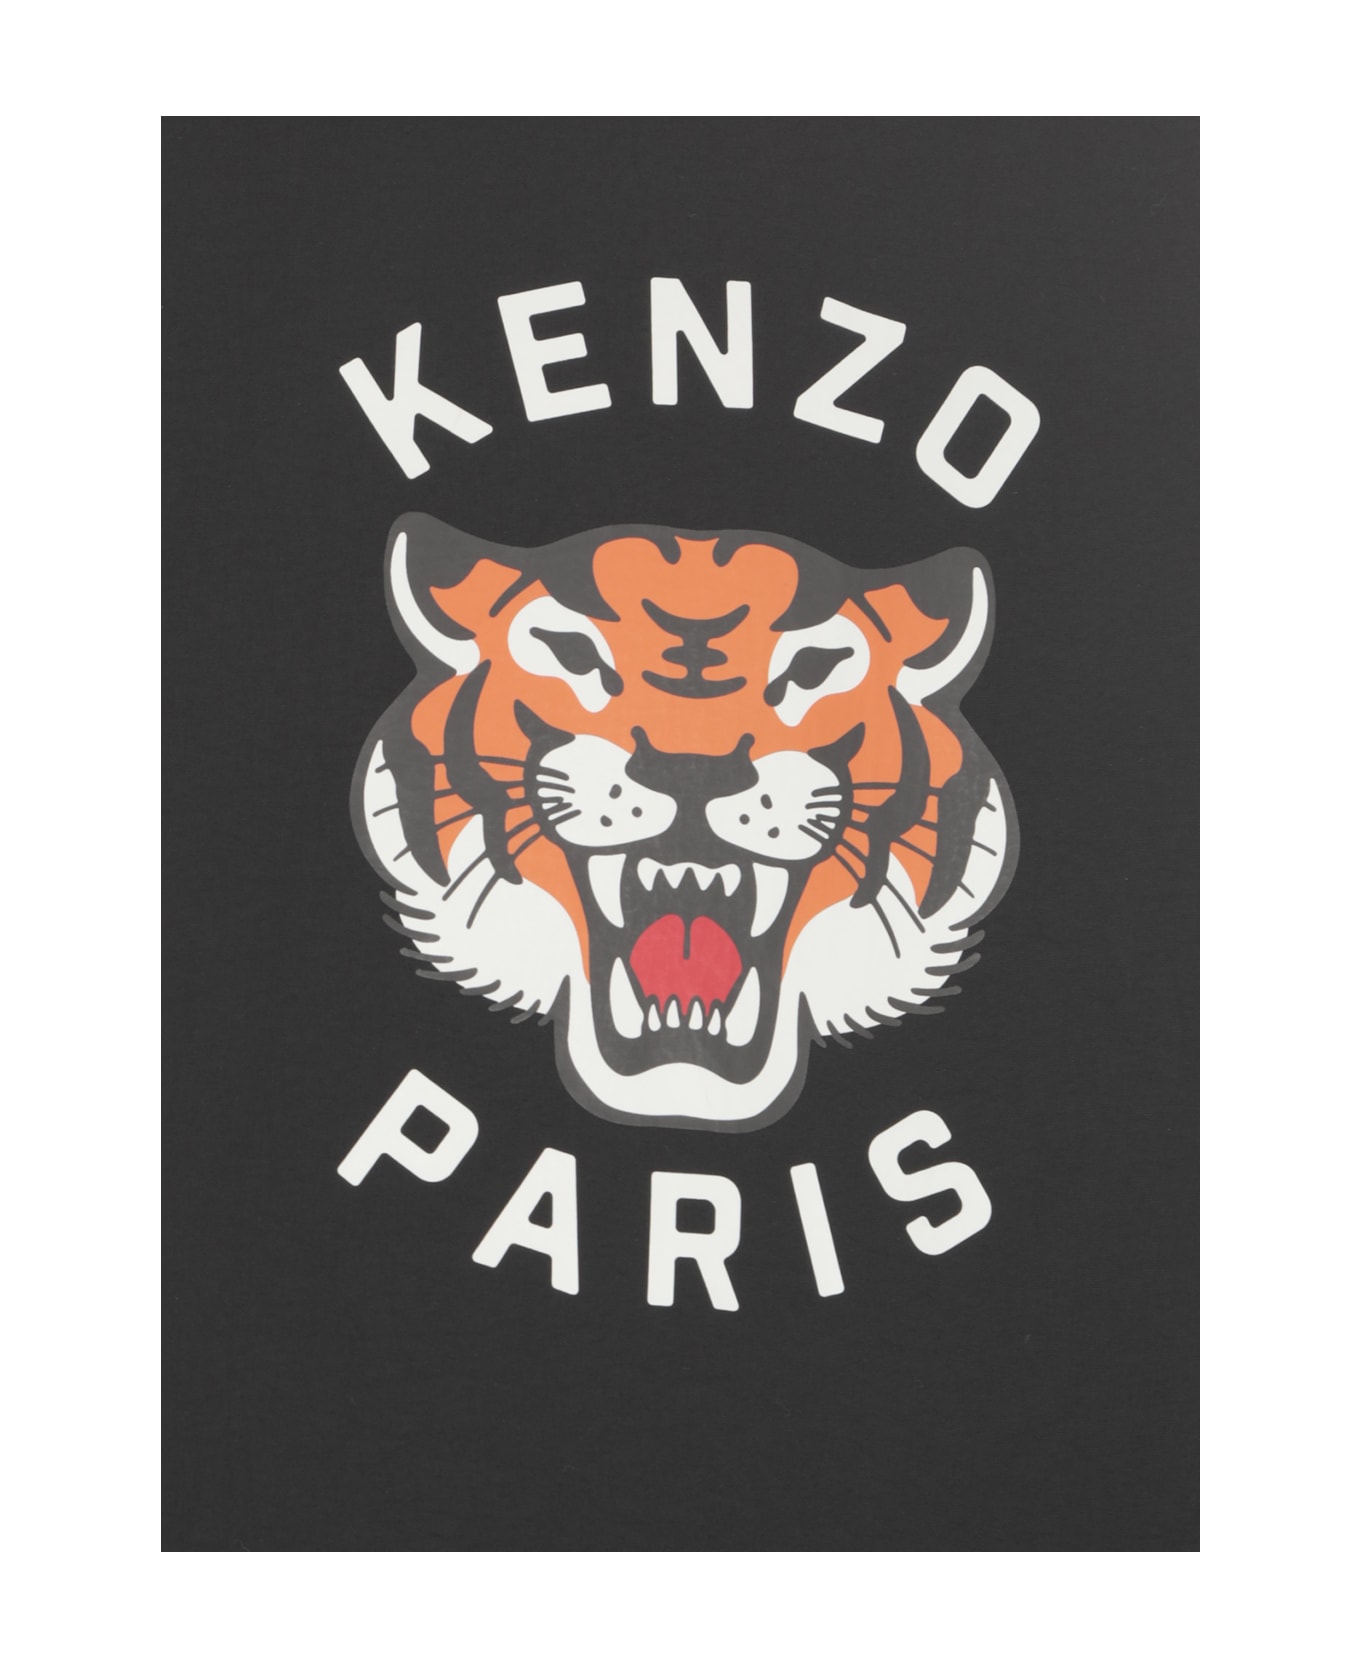 Kenzo Quilted Coach Jacket - Black